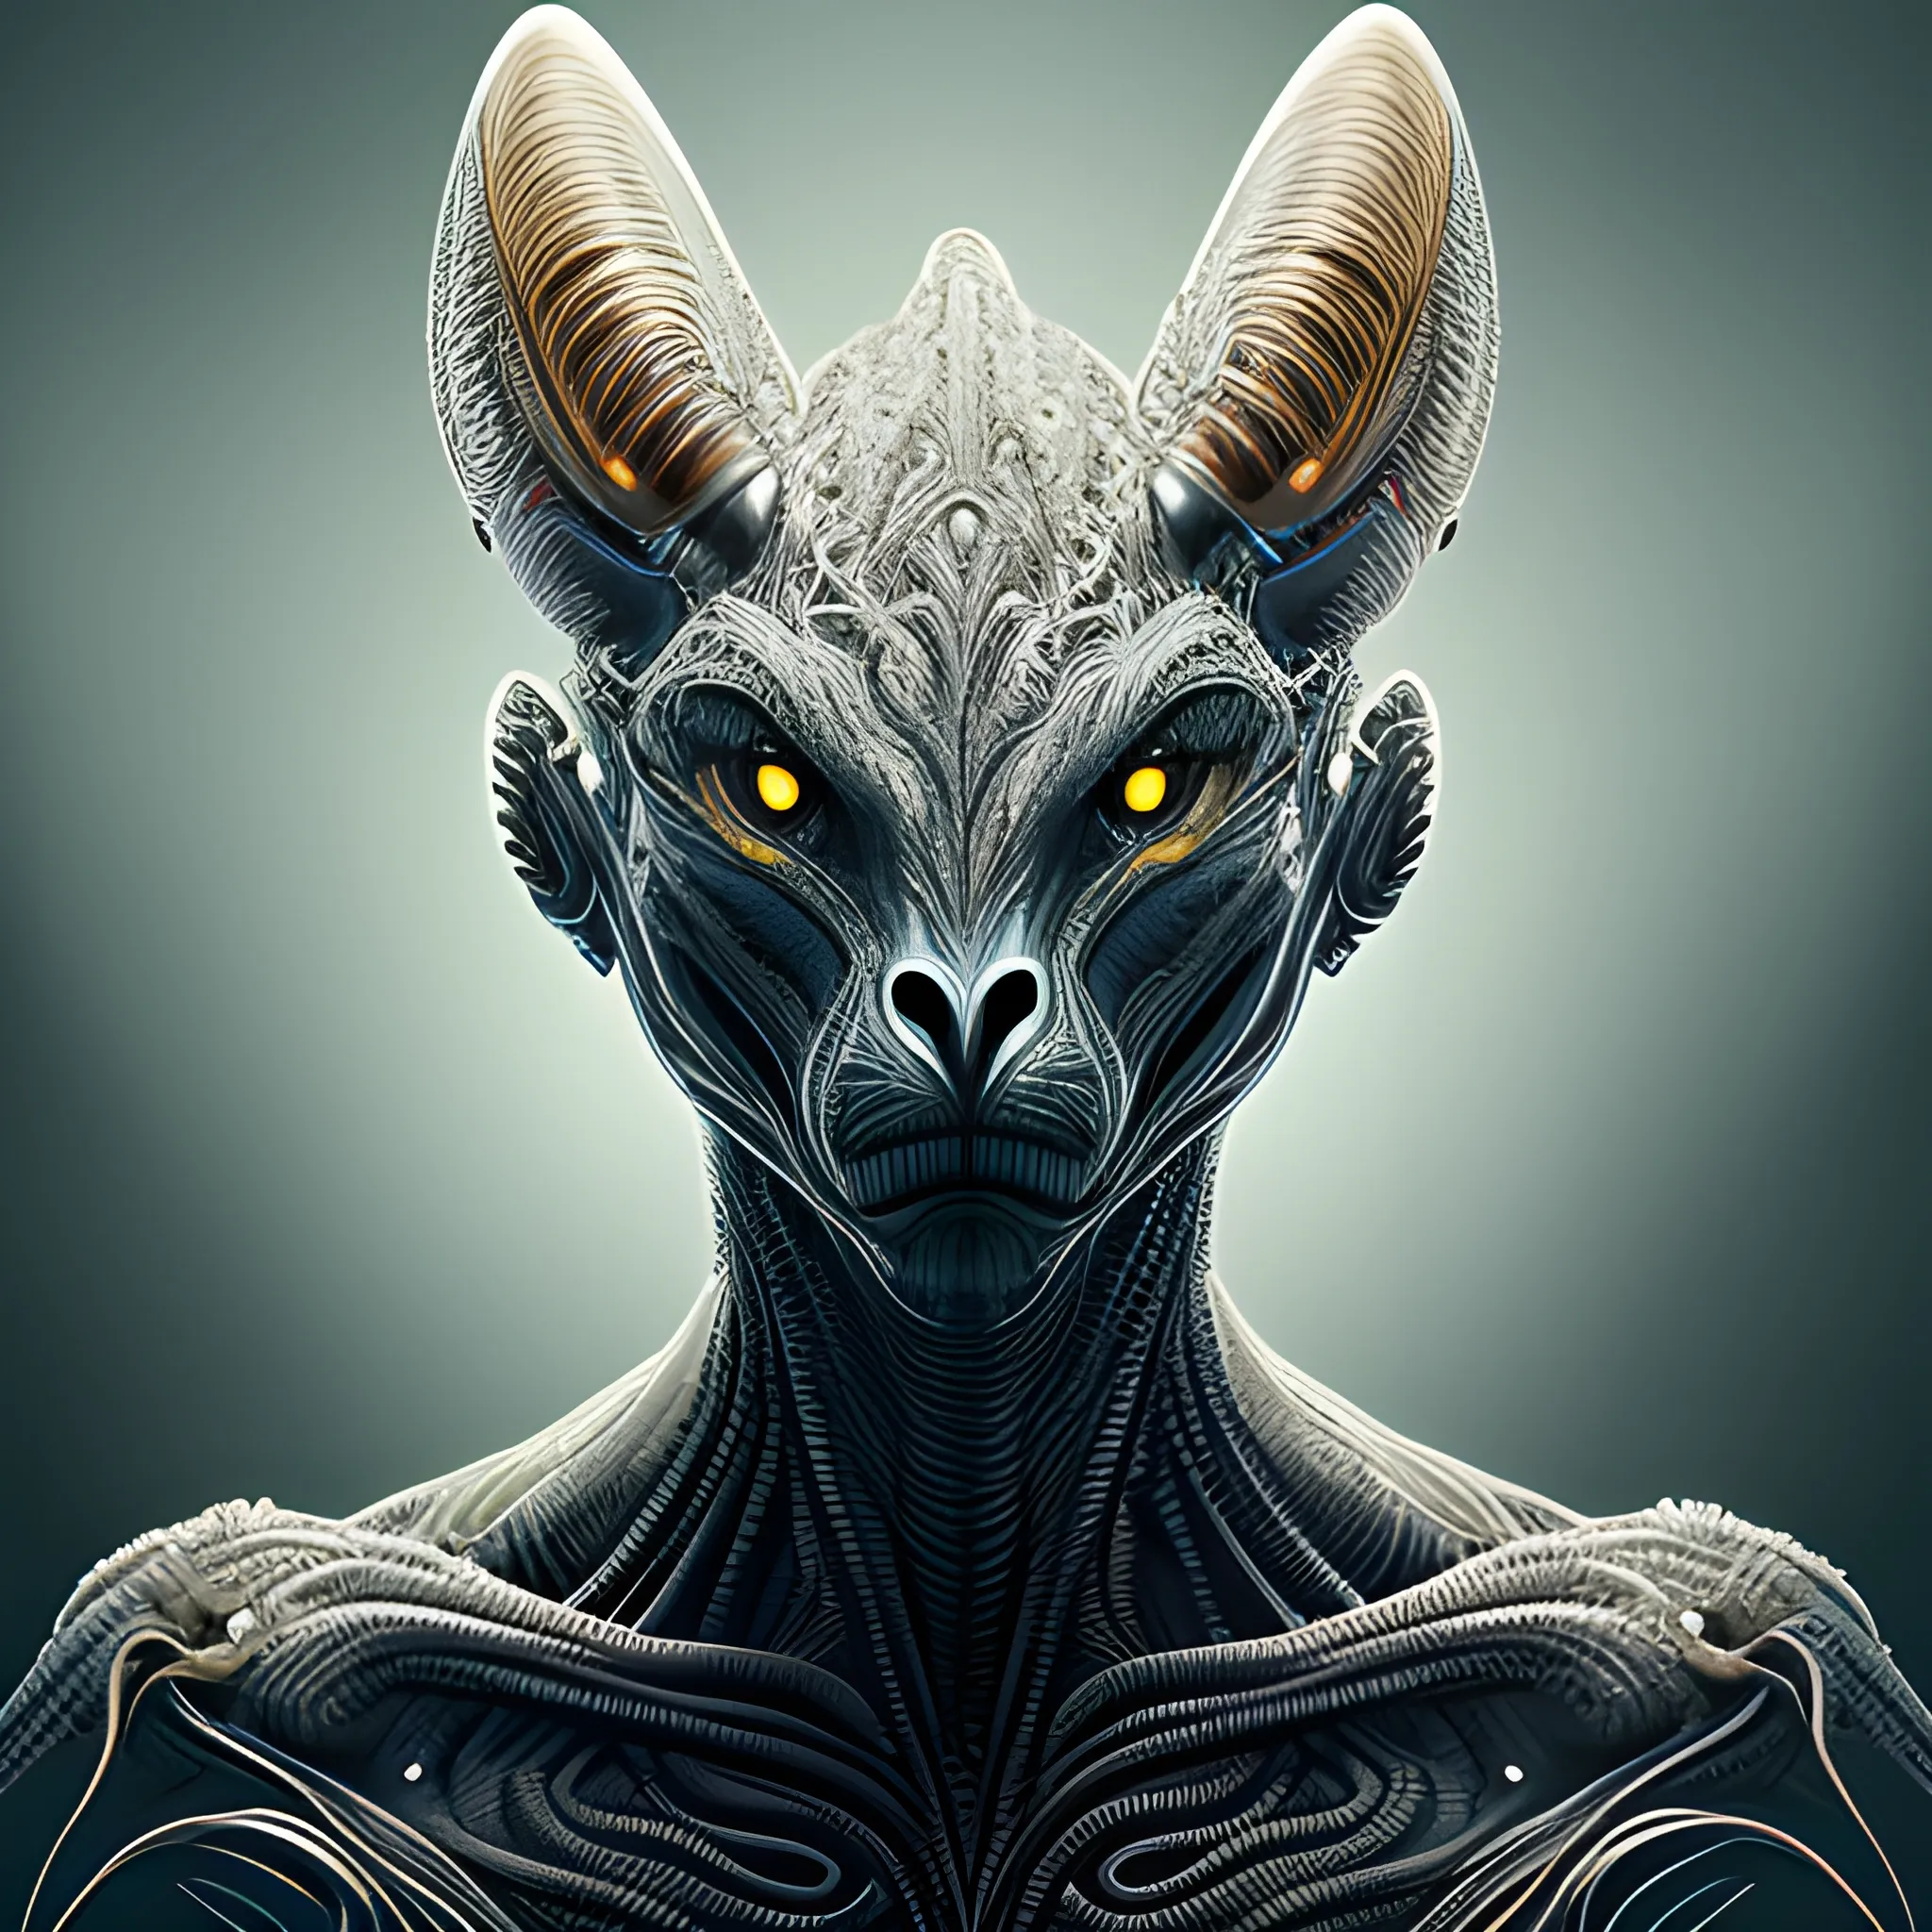 

A detailed and intricate digital art piece in a cinematic style, this ultra high resolution portrait of a powerful alien beast is a true masterpiece
